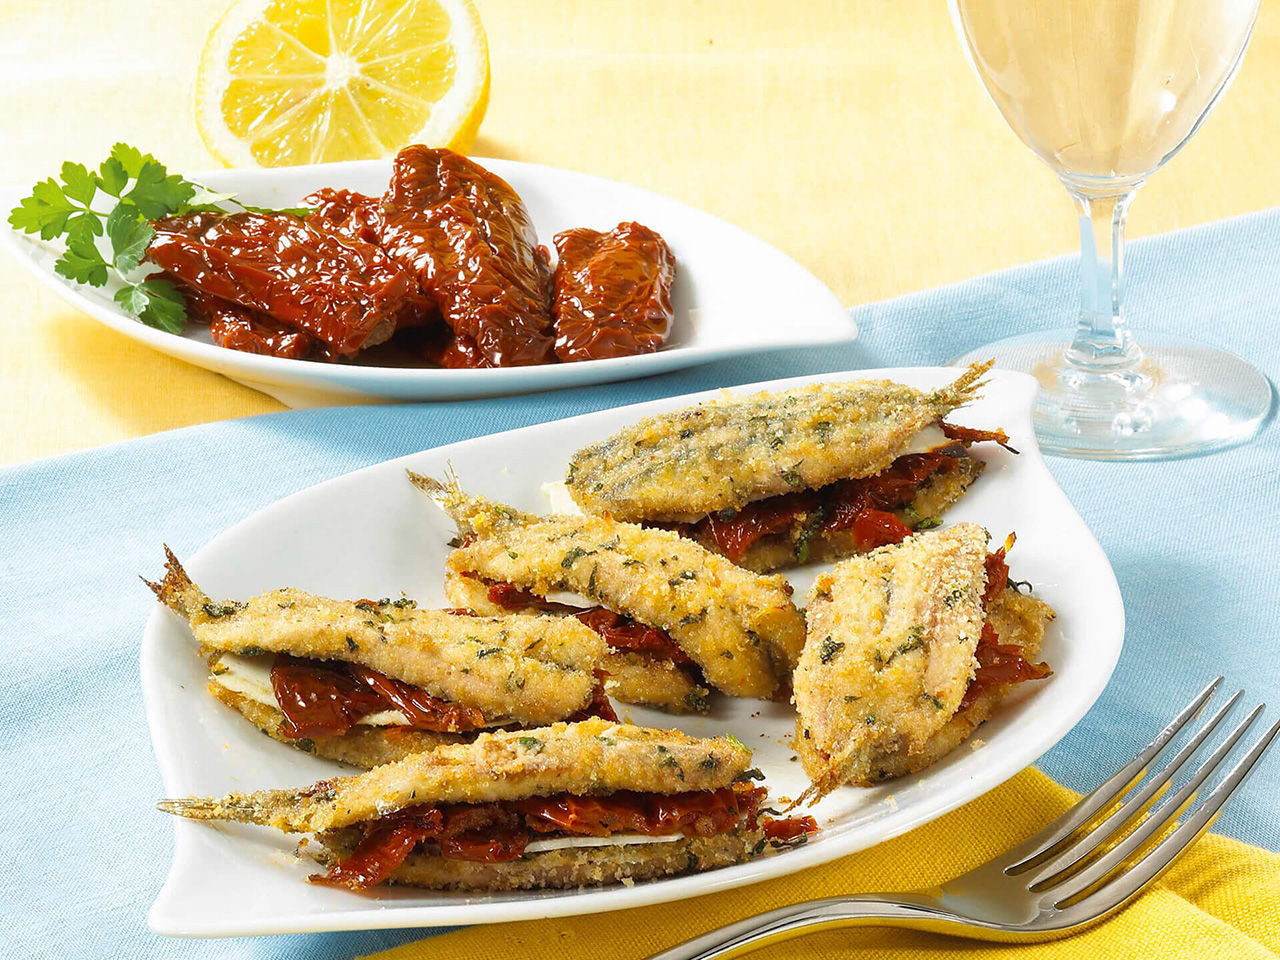 Fried anchovies with sun-dried tomatoes